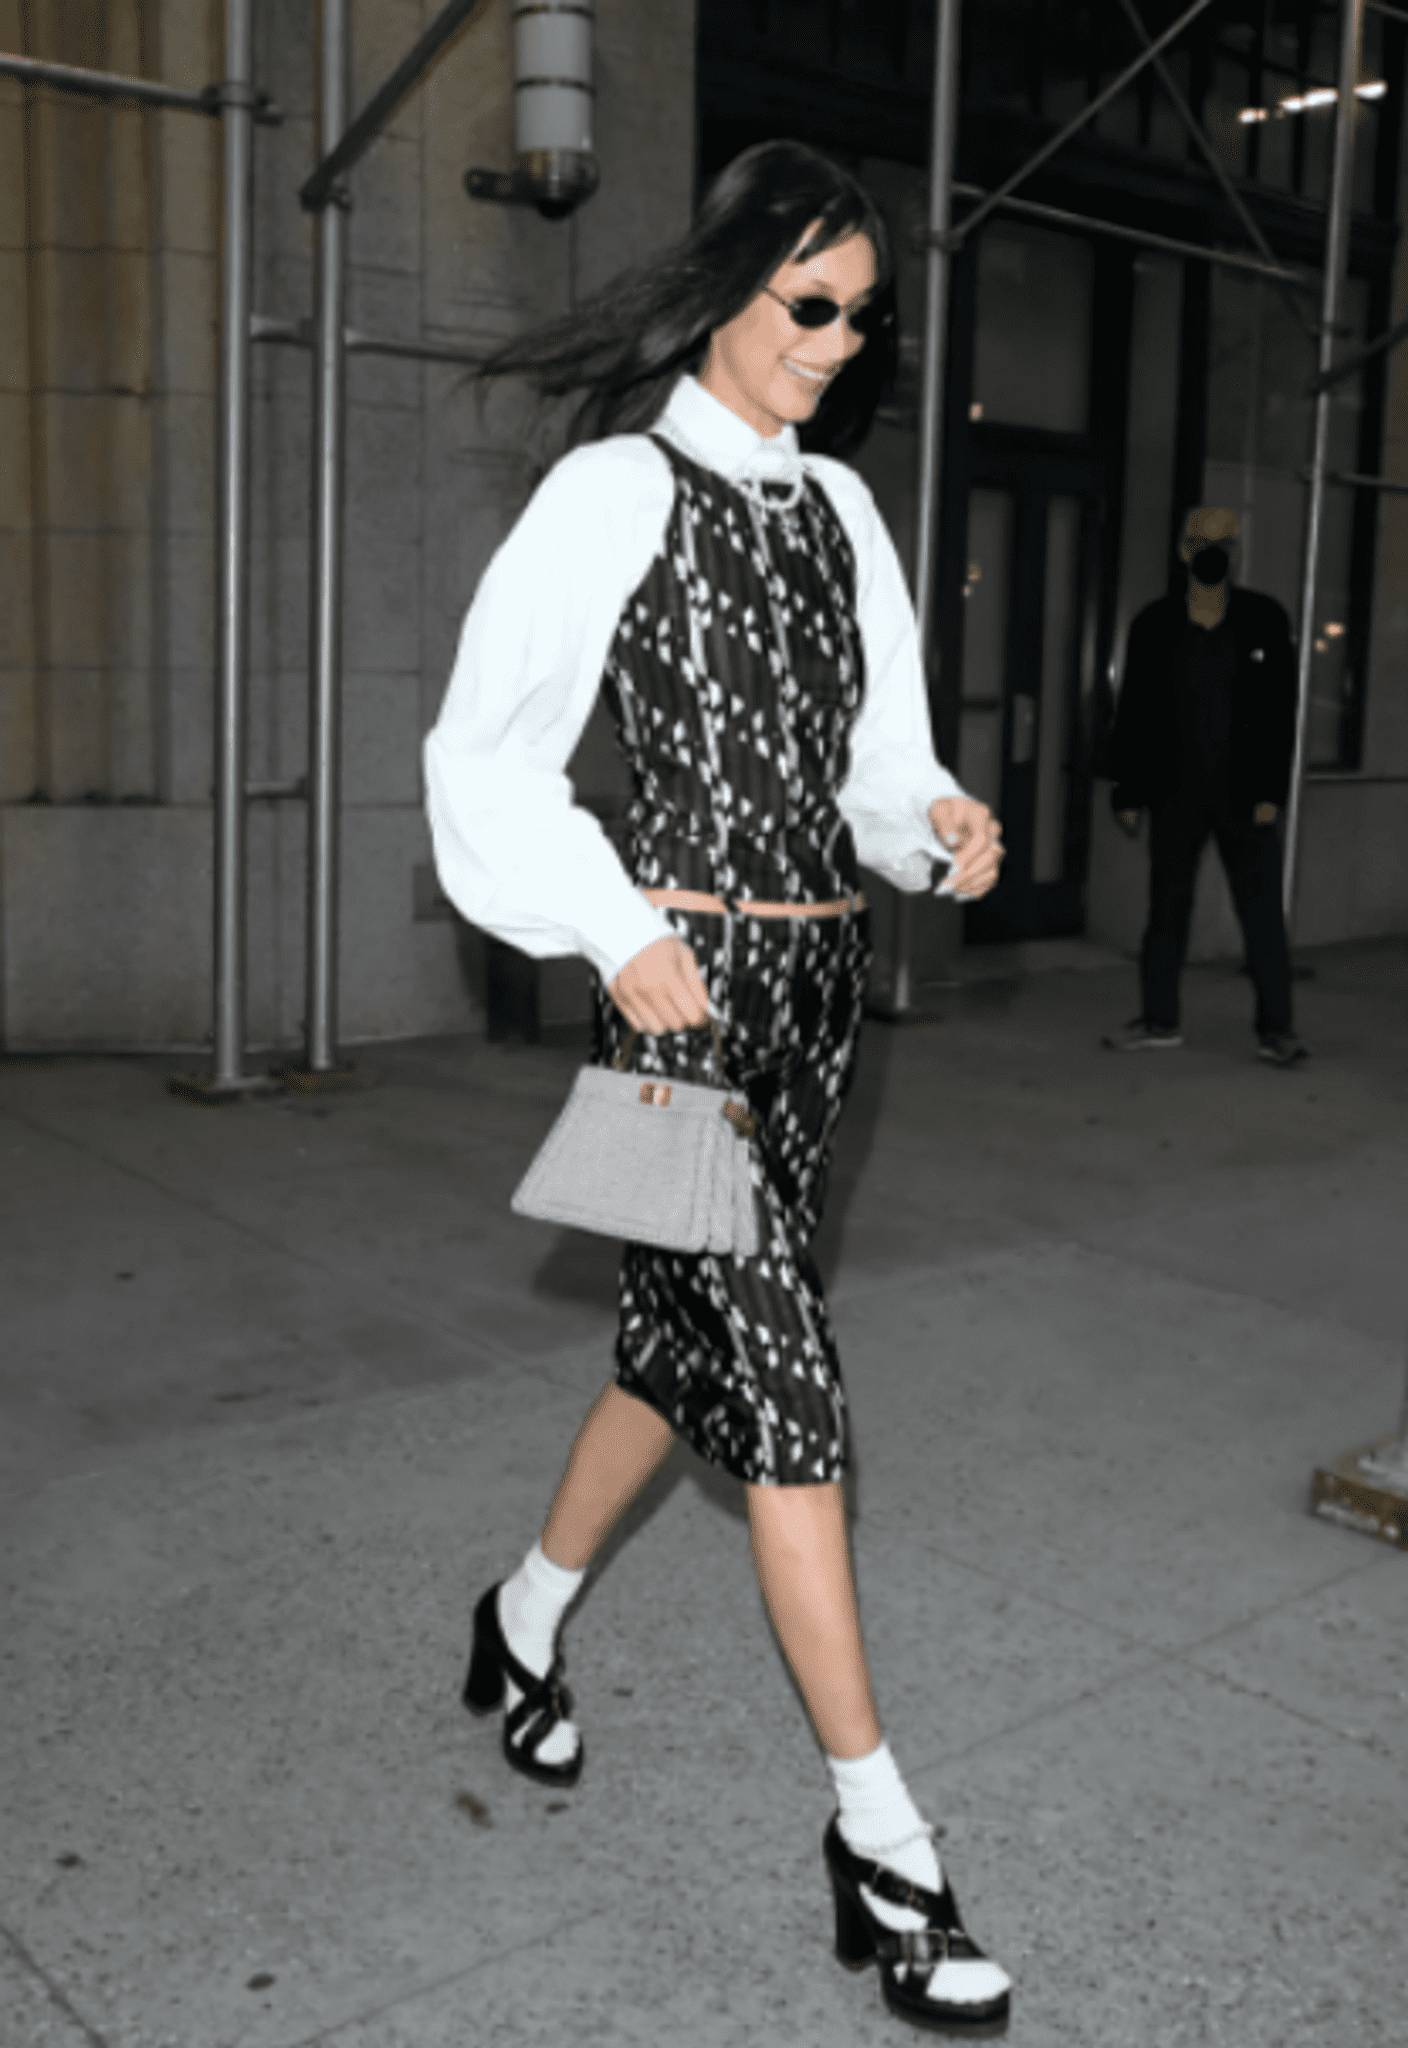 Bella Hadid proved that socks with sandals are still relevant